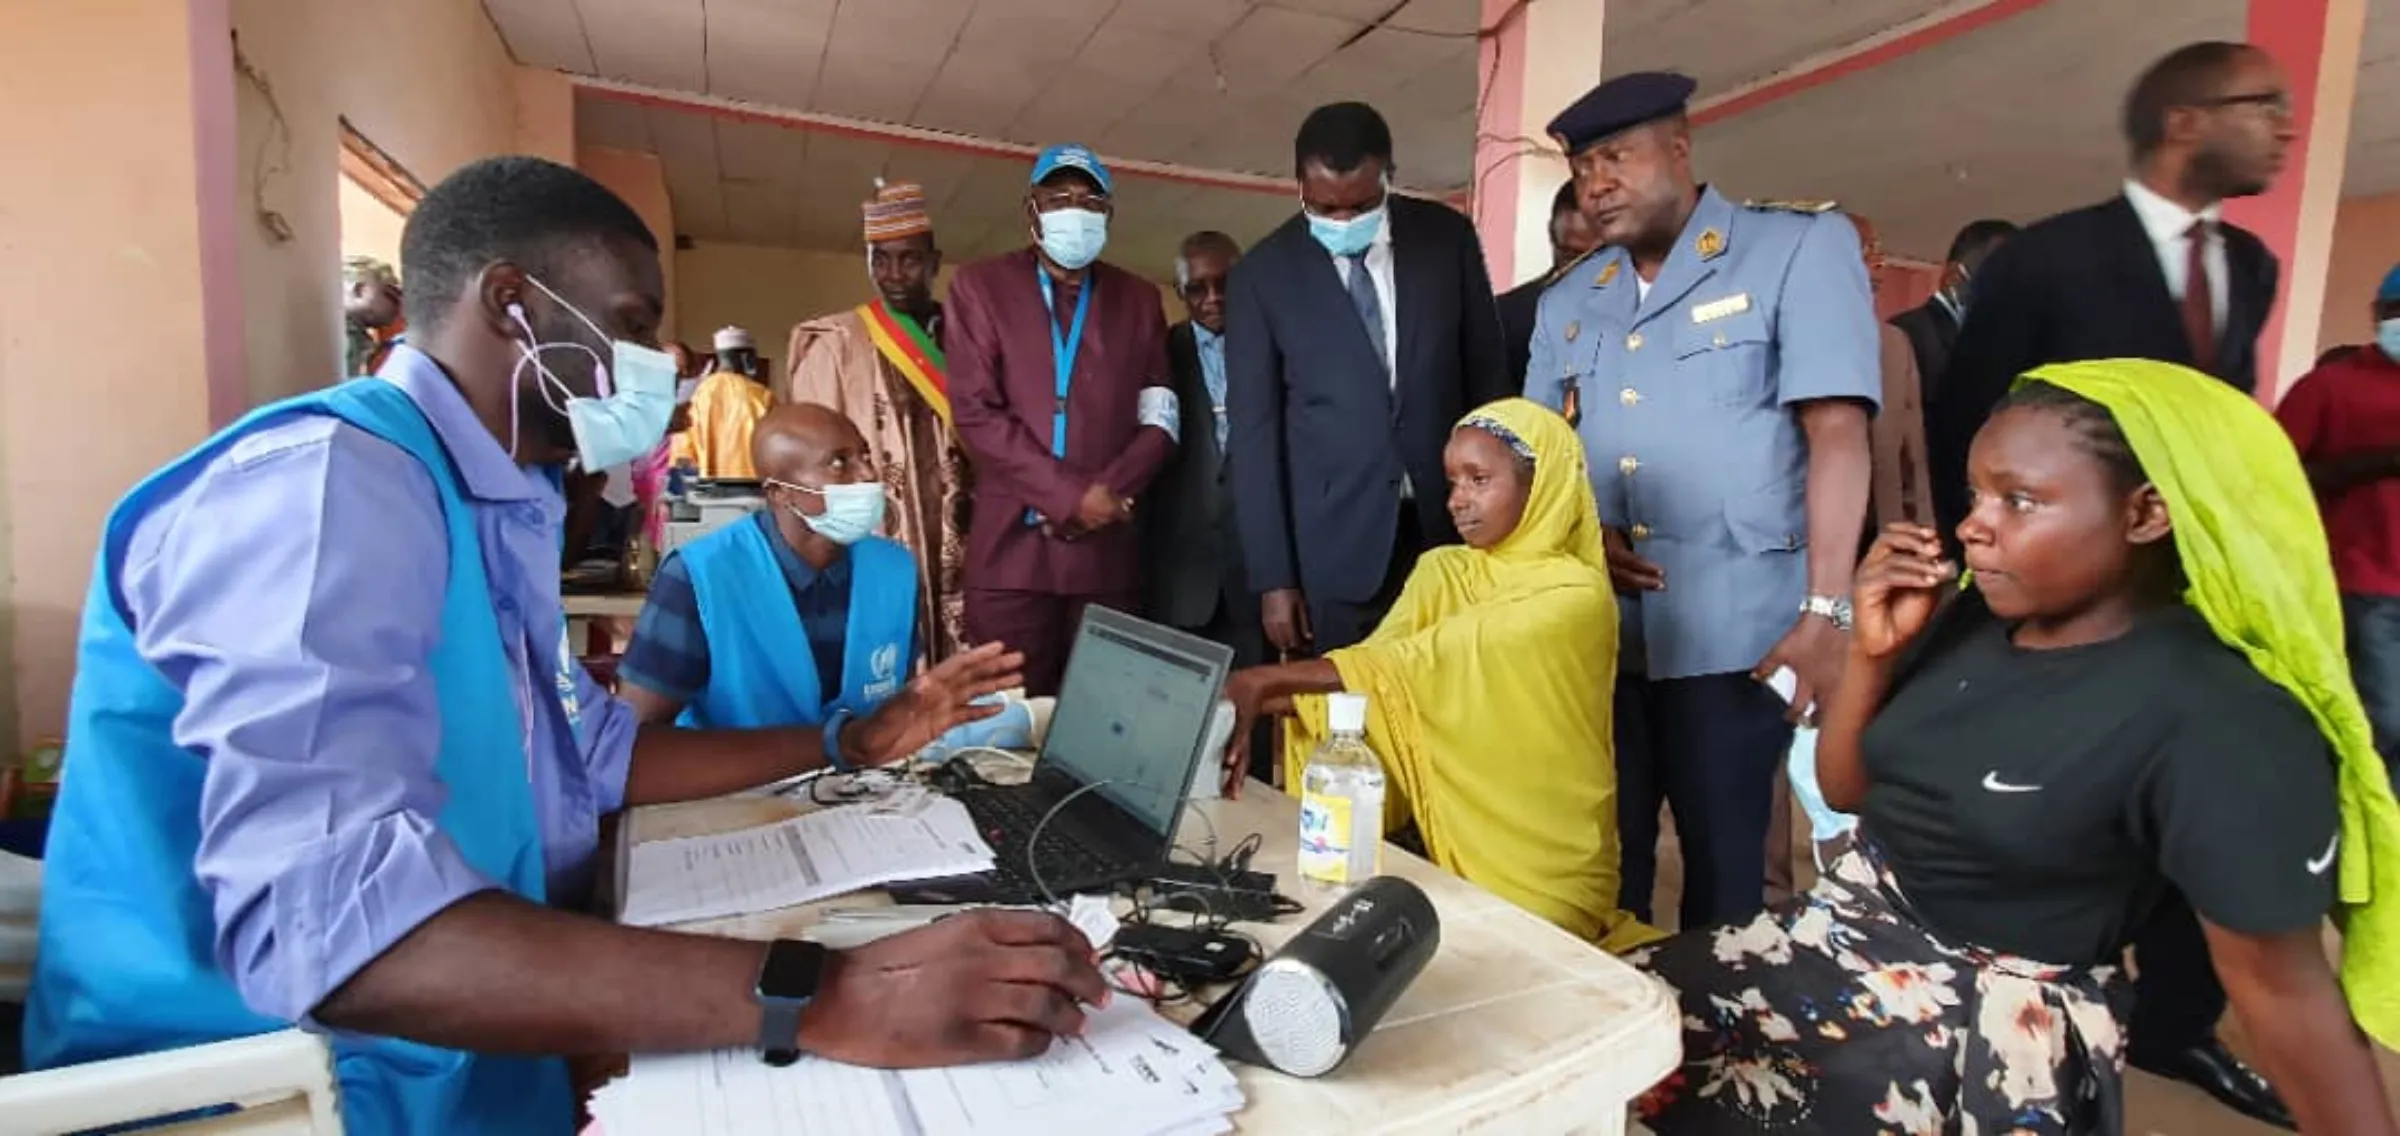 Officials supervise the delivery of digital ID cards to refugees from the Central African Republic at a camp in Cameroon